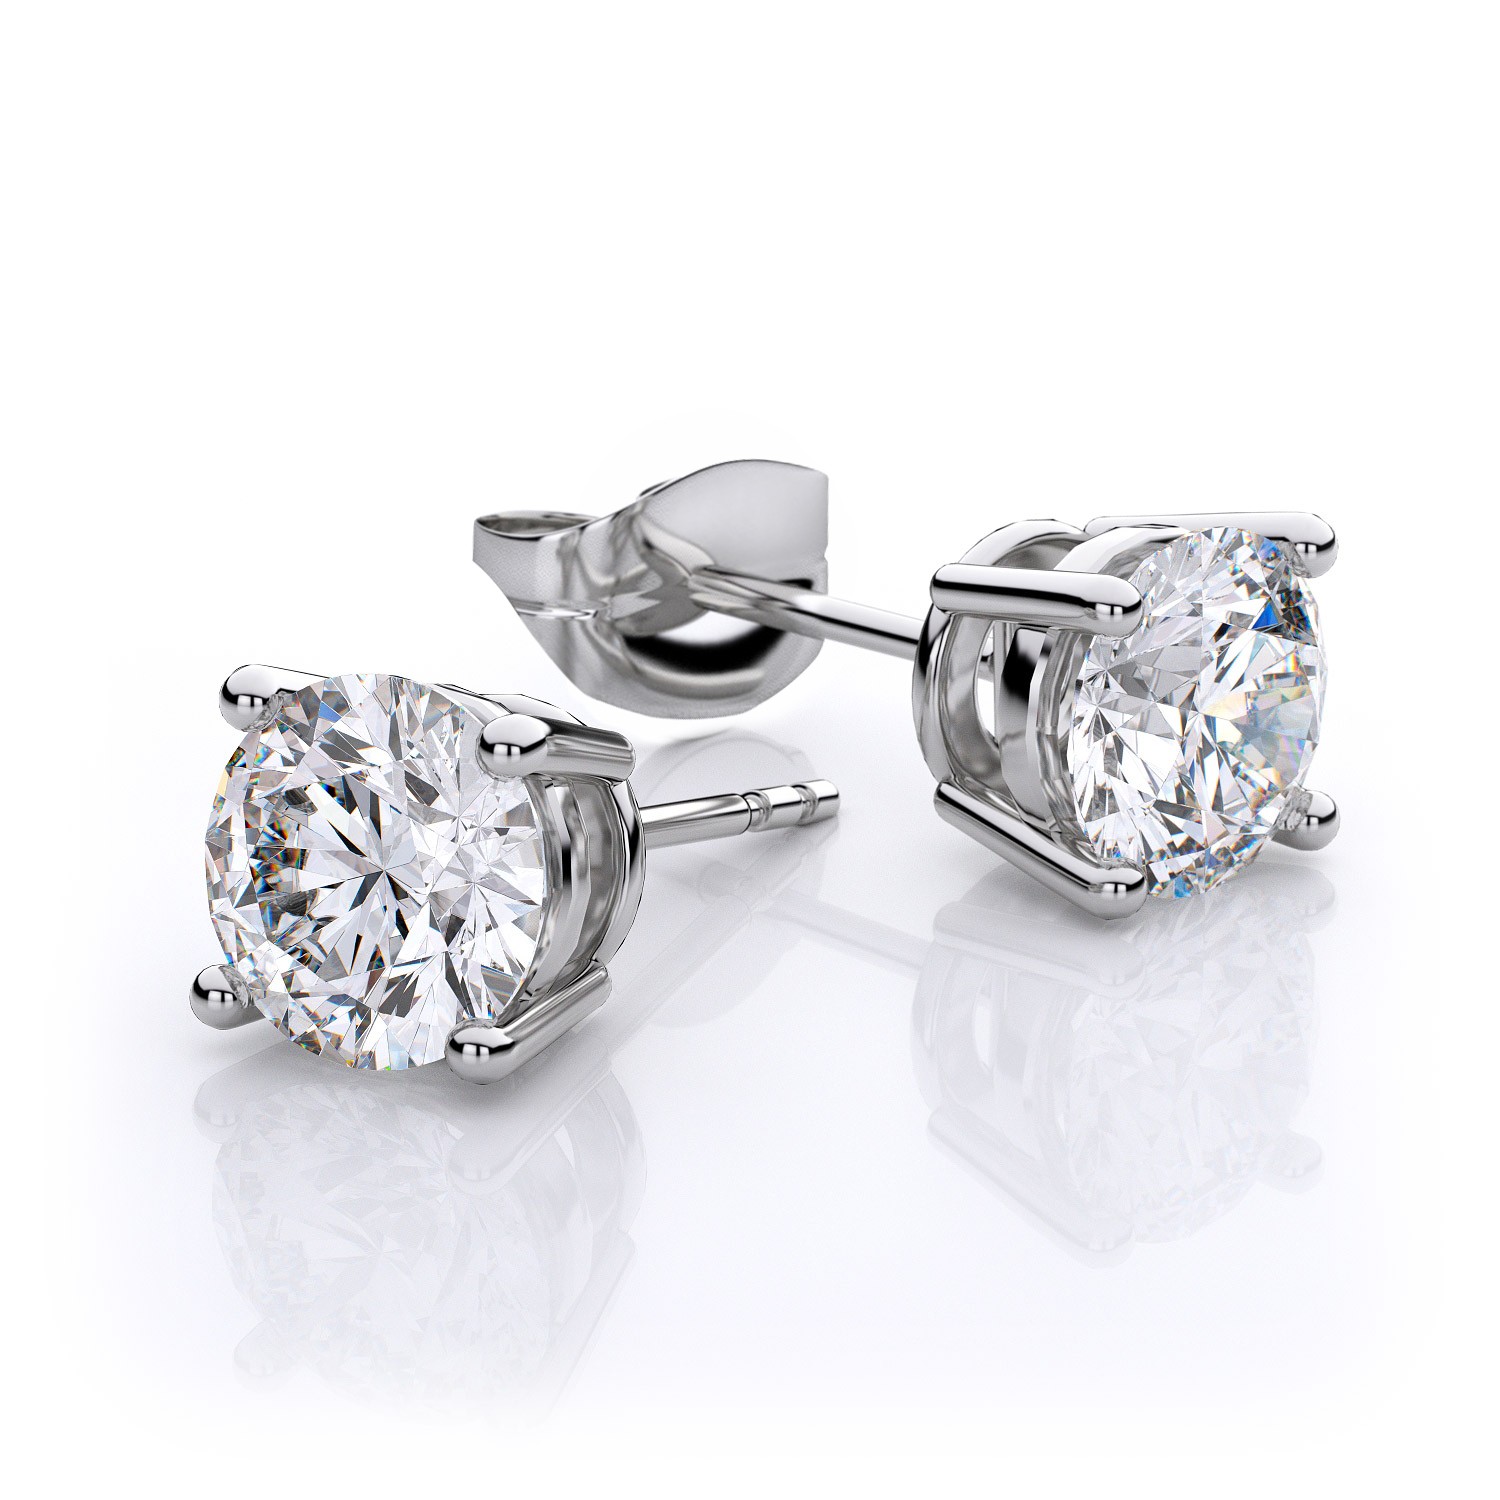 white gold diamond earrings ... 2.00 ct. t.w. 4 prong round diamond stud earrings in 14k white gold gia ngtwouv